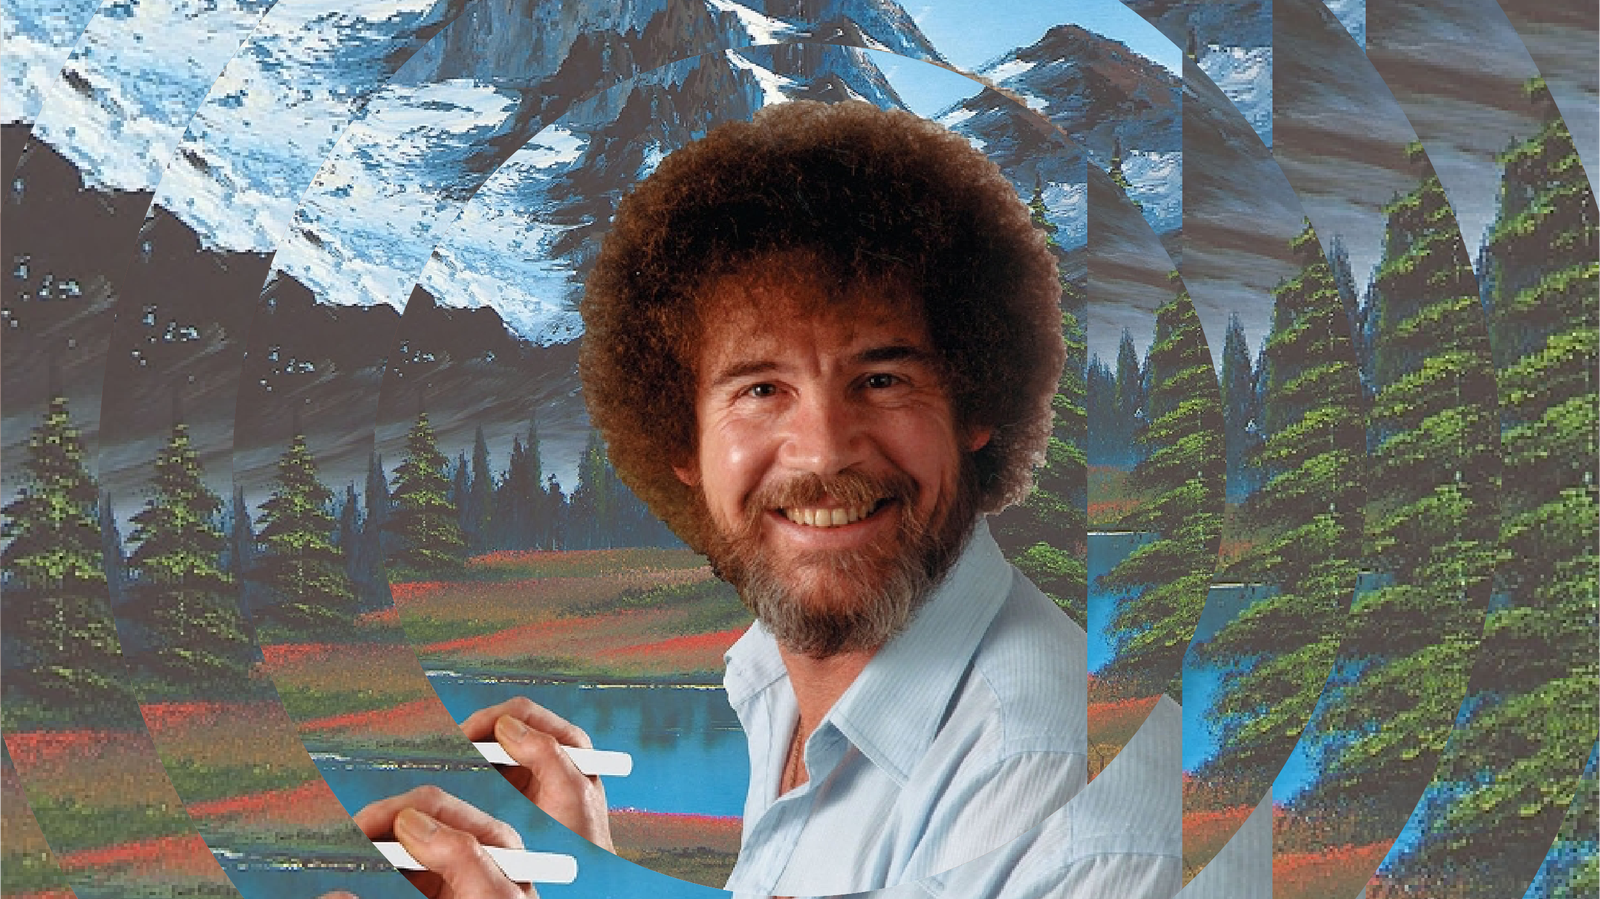 Bob Ross' Happy Little Accidents